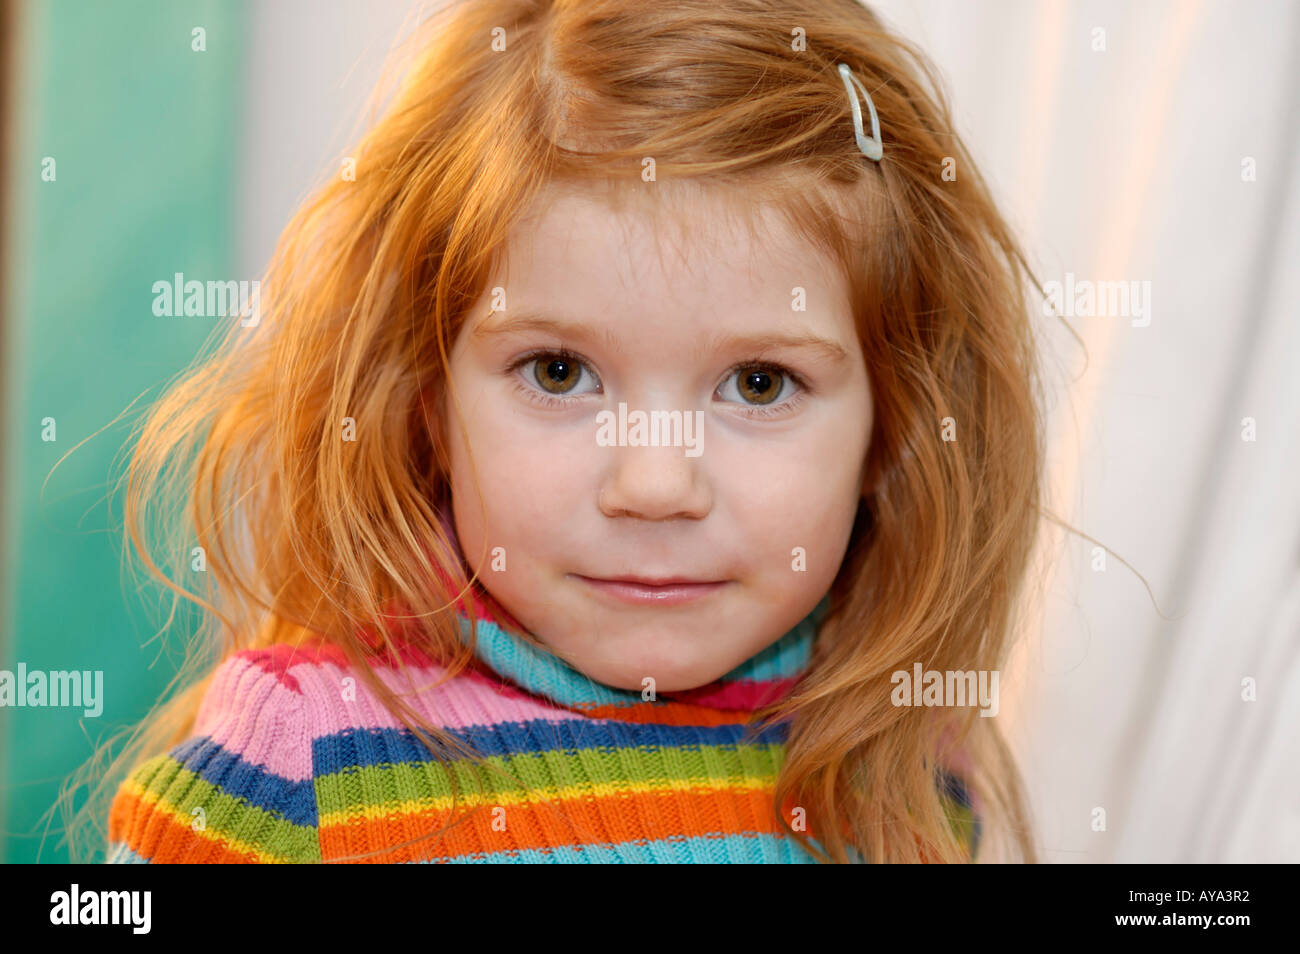 Portraet of a girl 4 years old Stock Photo